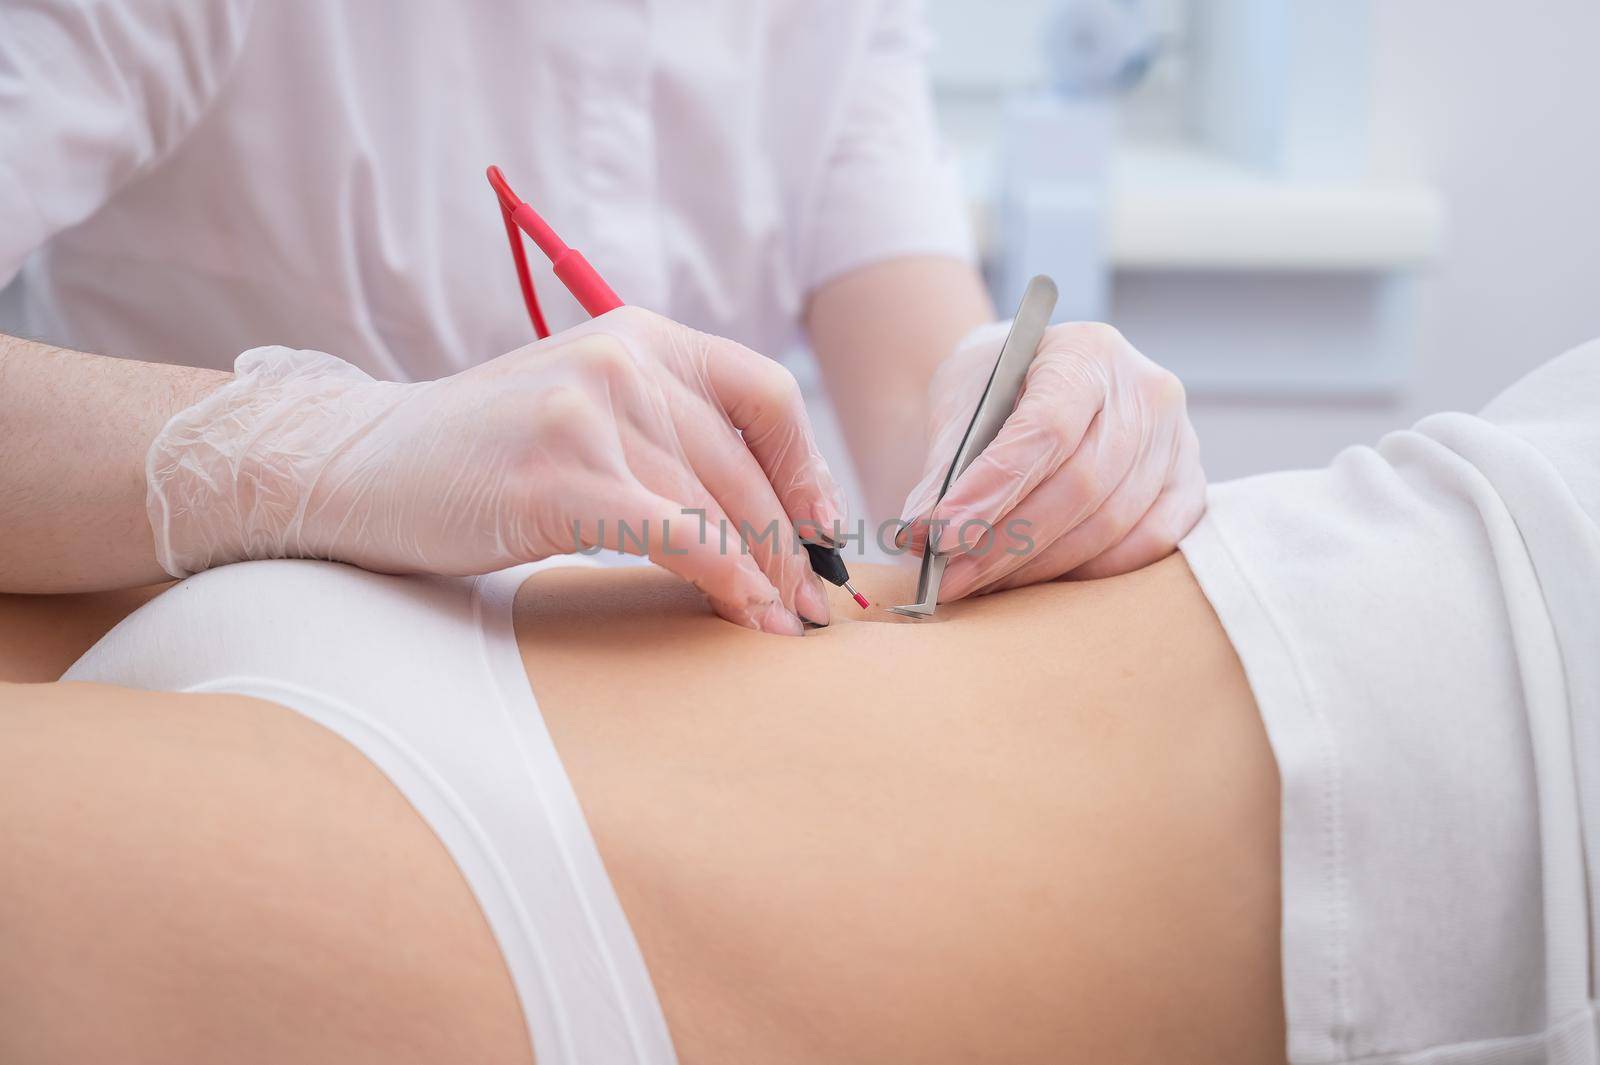 Woman on electro epilation on her tummy. Permanent hardware removal of unwanted abdominal hair